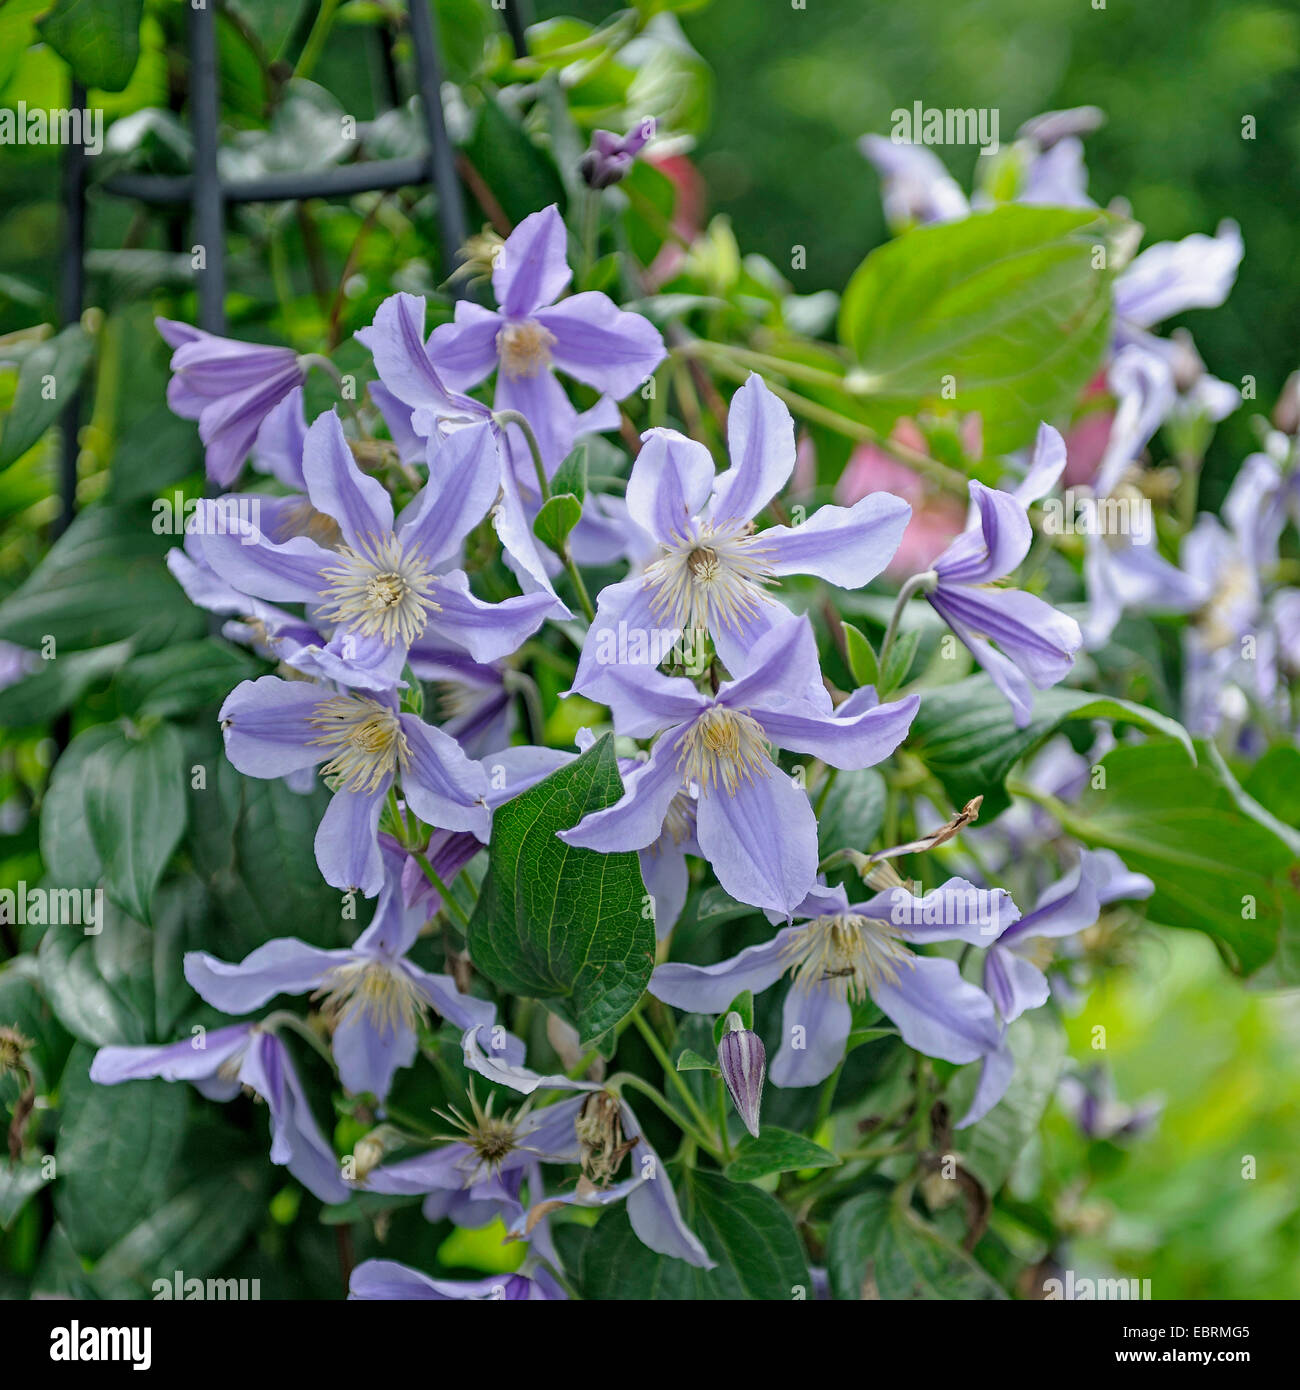 Clematis, vergini-bower (Clematis 'Star River', Clematis fiume Stella), cultivar fiume Stella Foto Stock